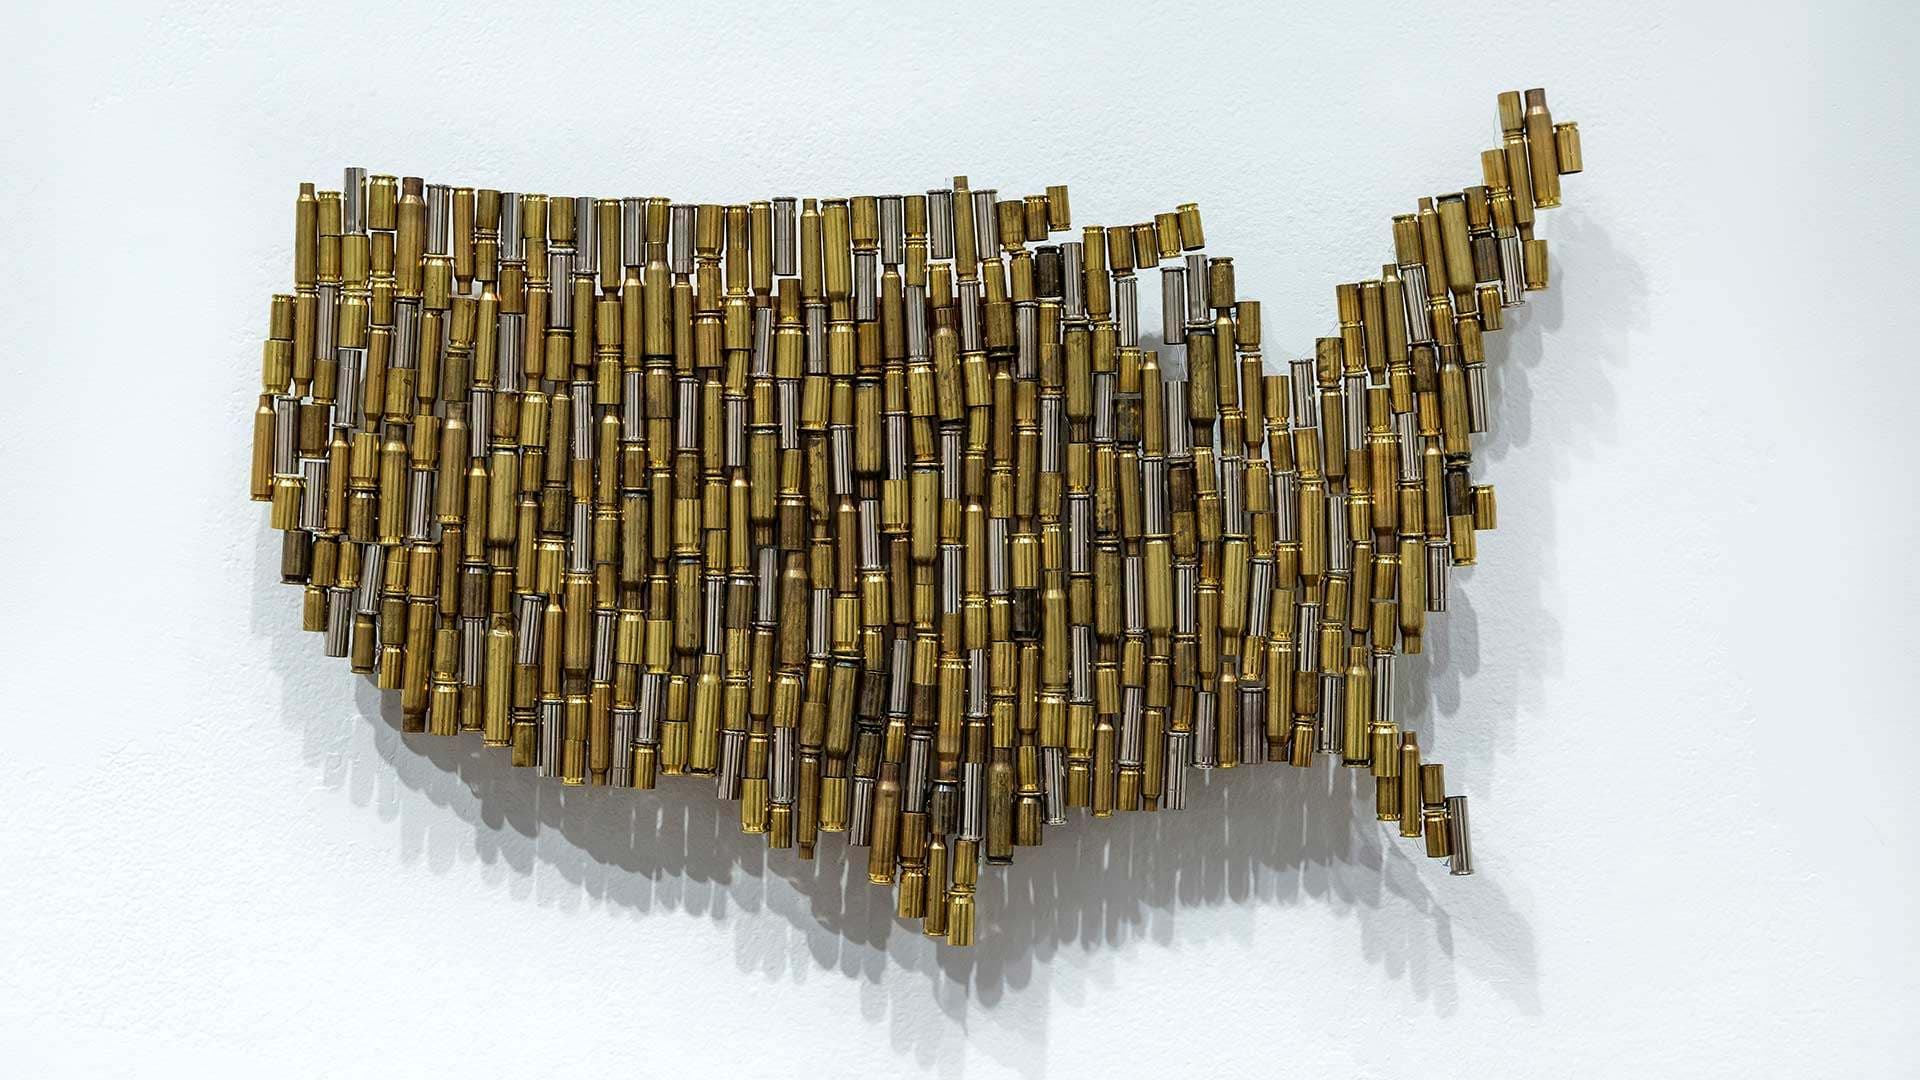 bullet casings arranged in shape of United States